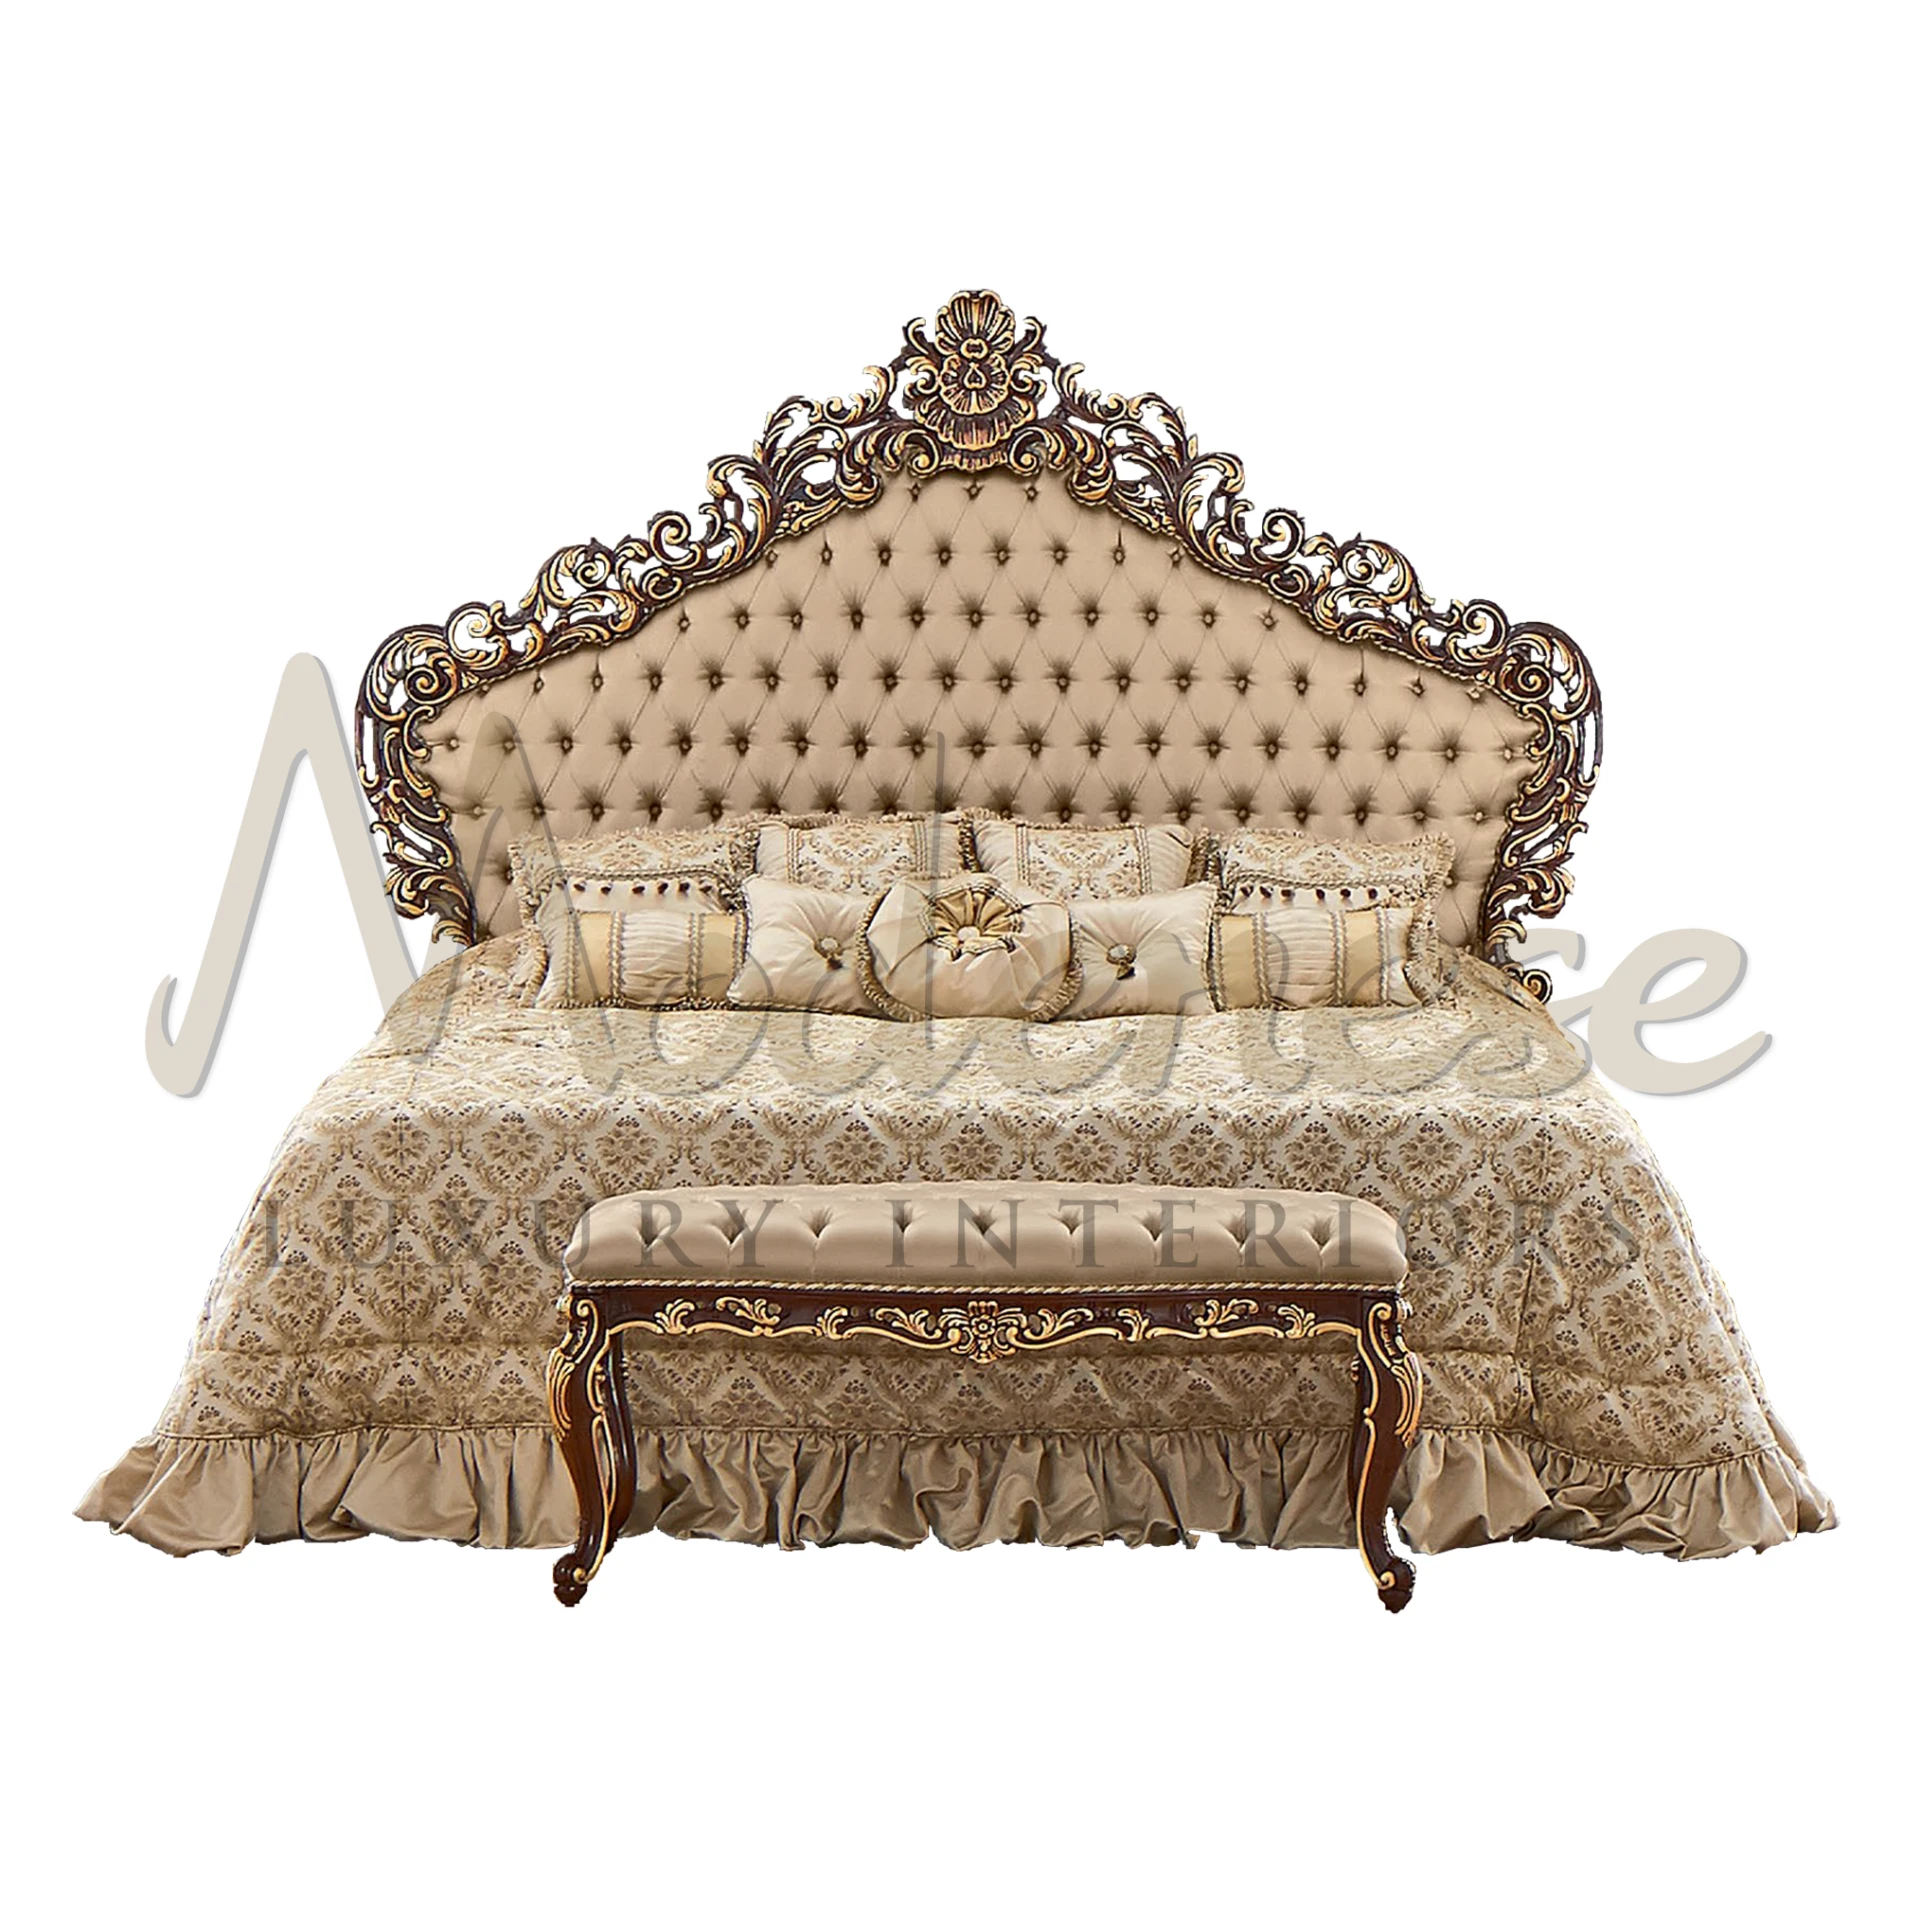 Beige Luxury Bed Cover by Modenese, creating a sophisticated sleep space with its sumptuous comfort and refined elegance.